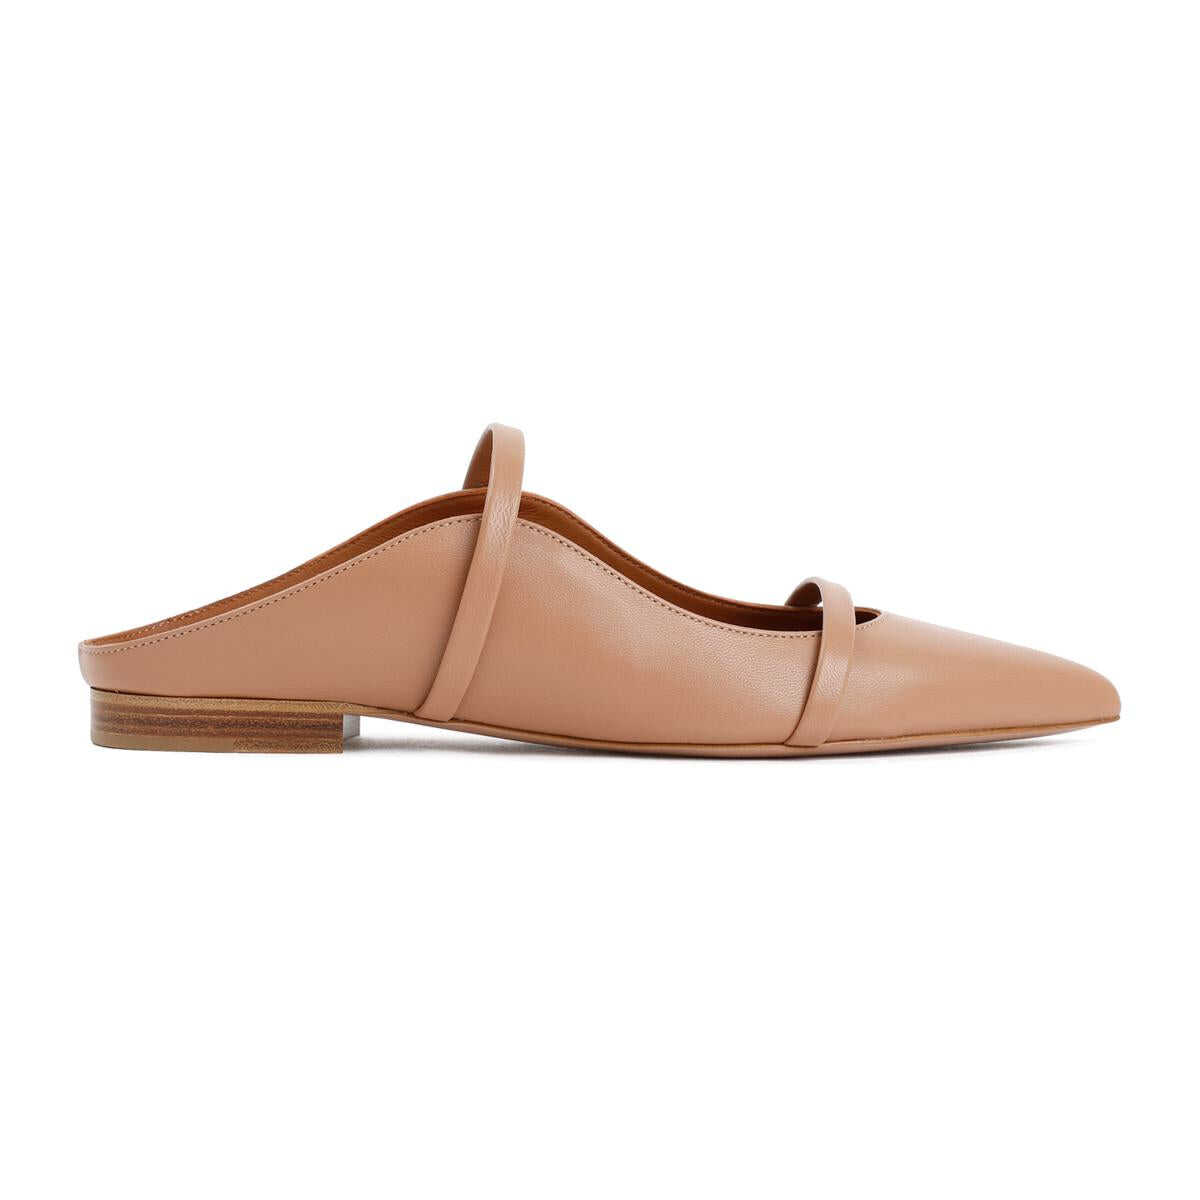 MALONE SOULIERS MALONE SOULIERS MAUREEN FLAT SHOES Nude & Neutrals